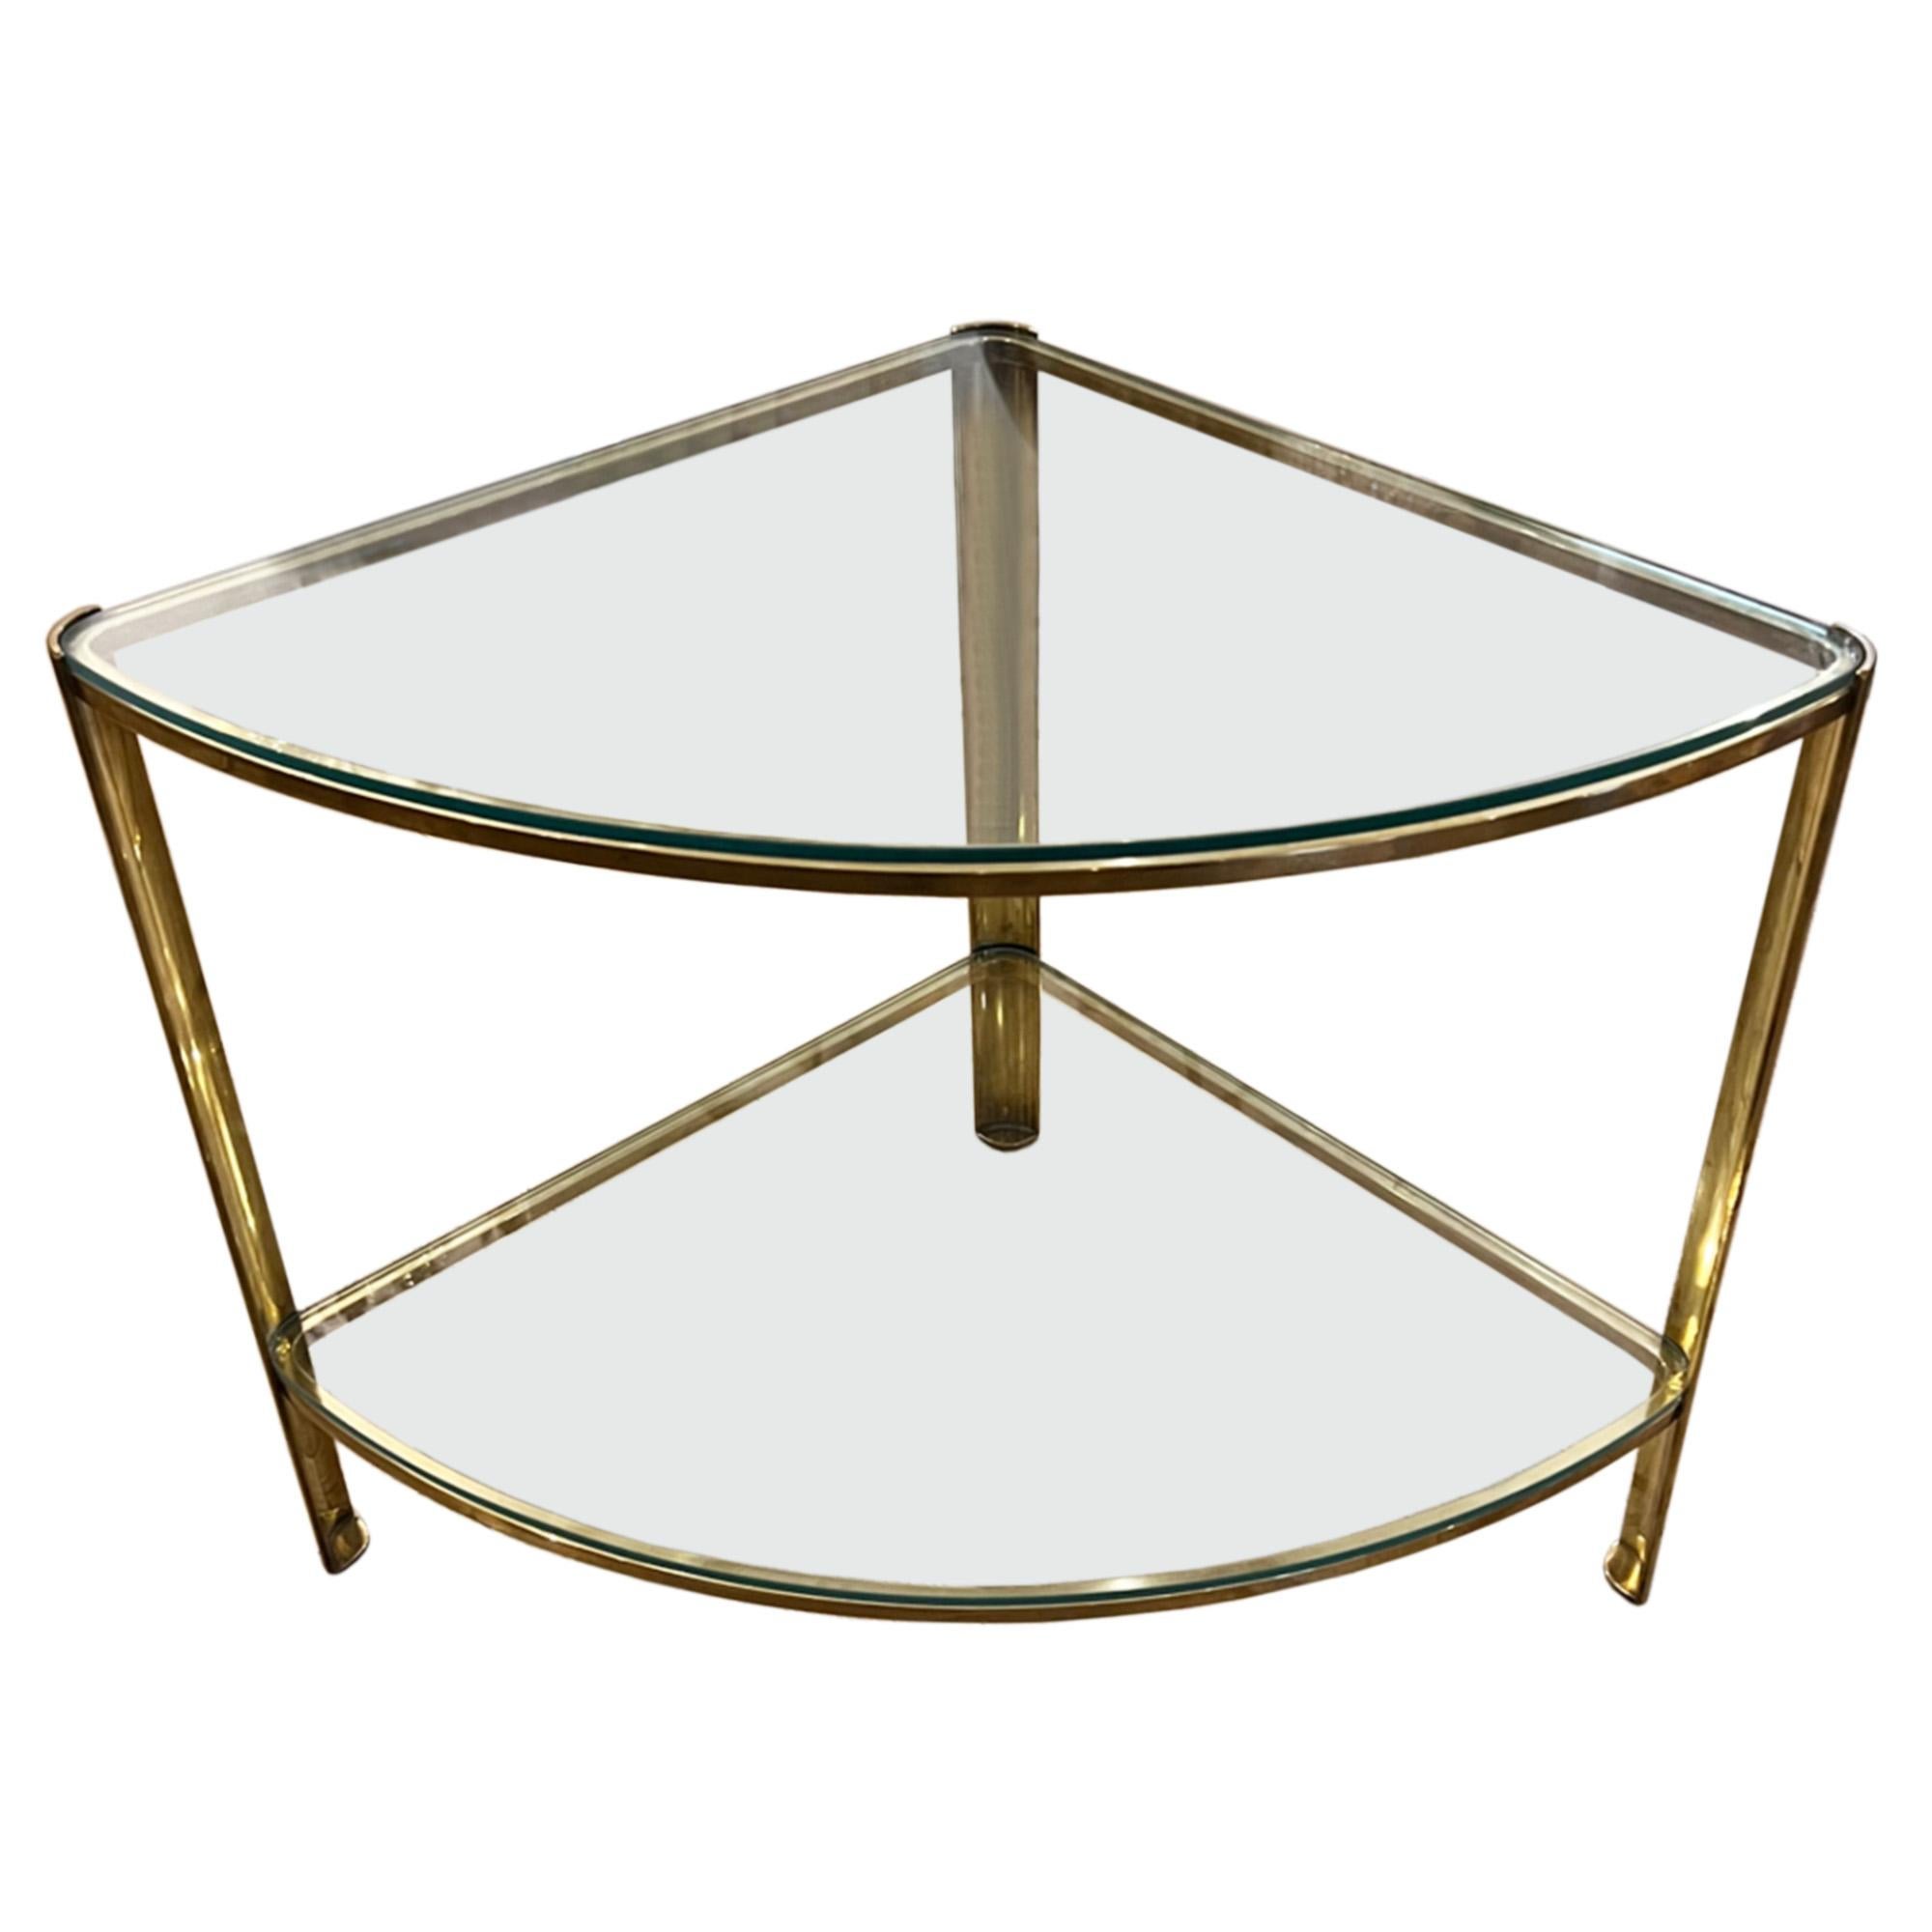 A super stylish design, this pair of elegant side tables are made from brass and glass. 

This is the quarter circle, two tier model and it's difficult to find a pair.

Perfect tables for any living room. The height of the lower shelves is 14cm.